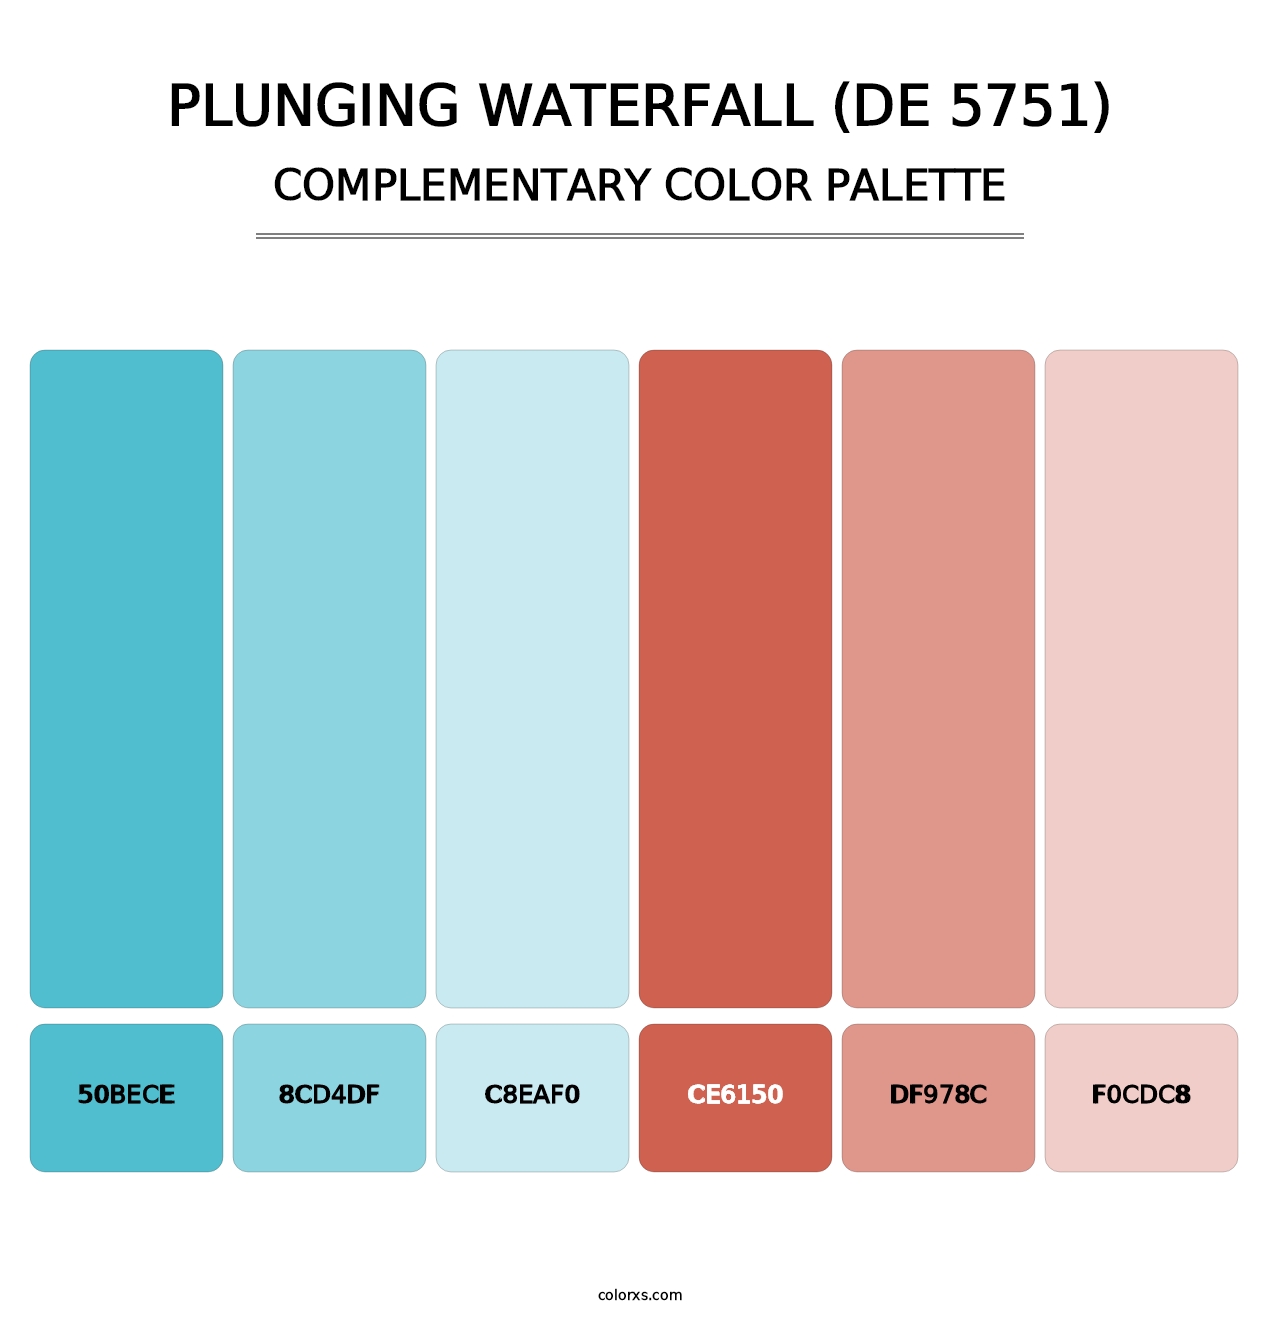 Plunging Waterfall (DE 5751) - Complementary Color Palette